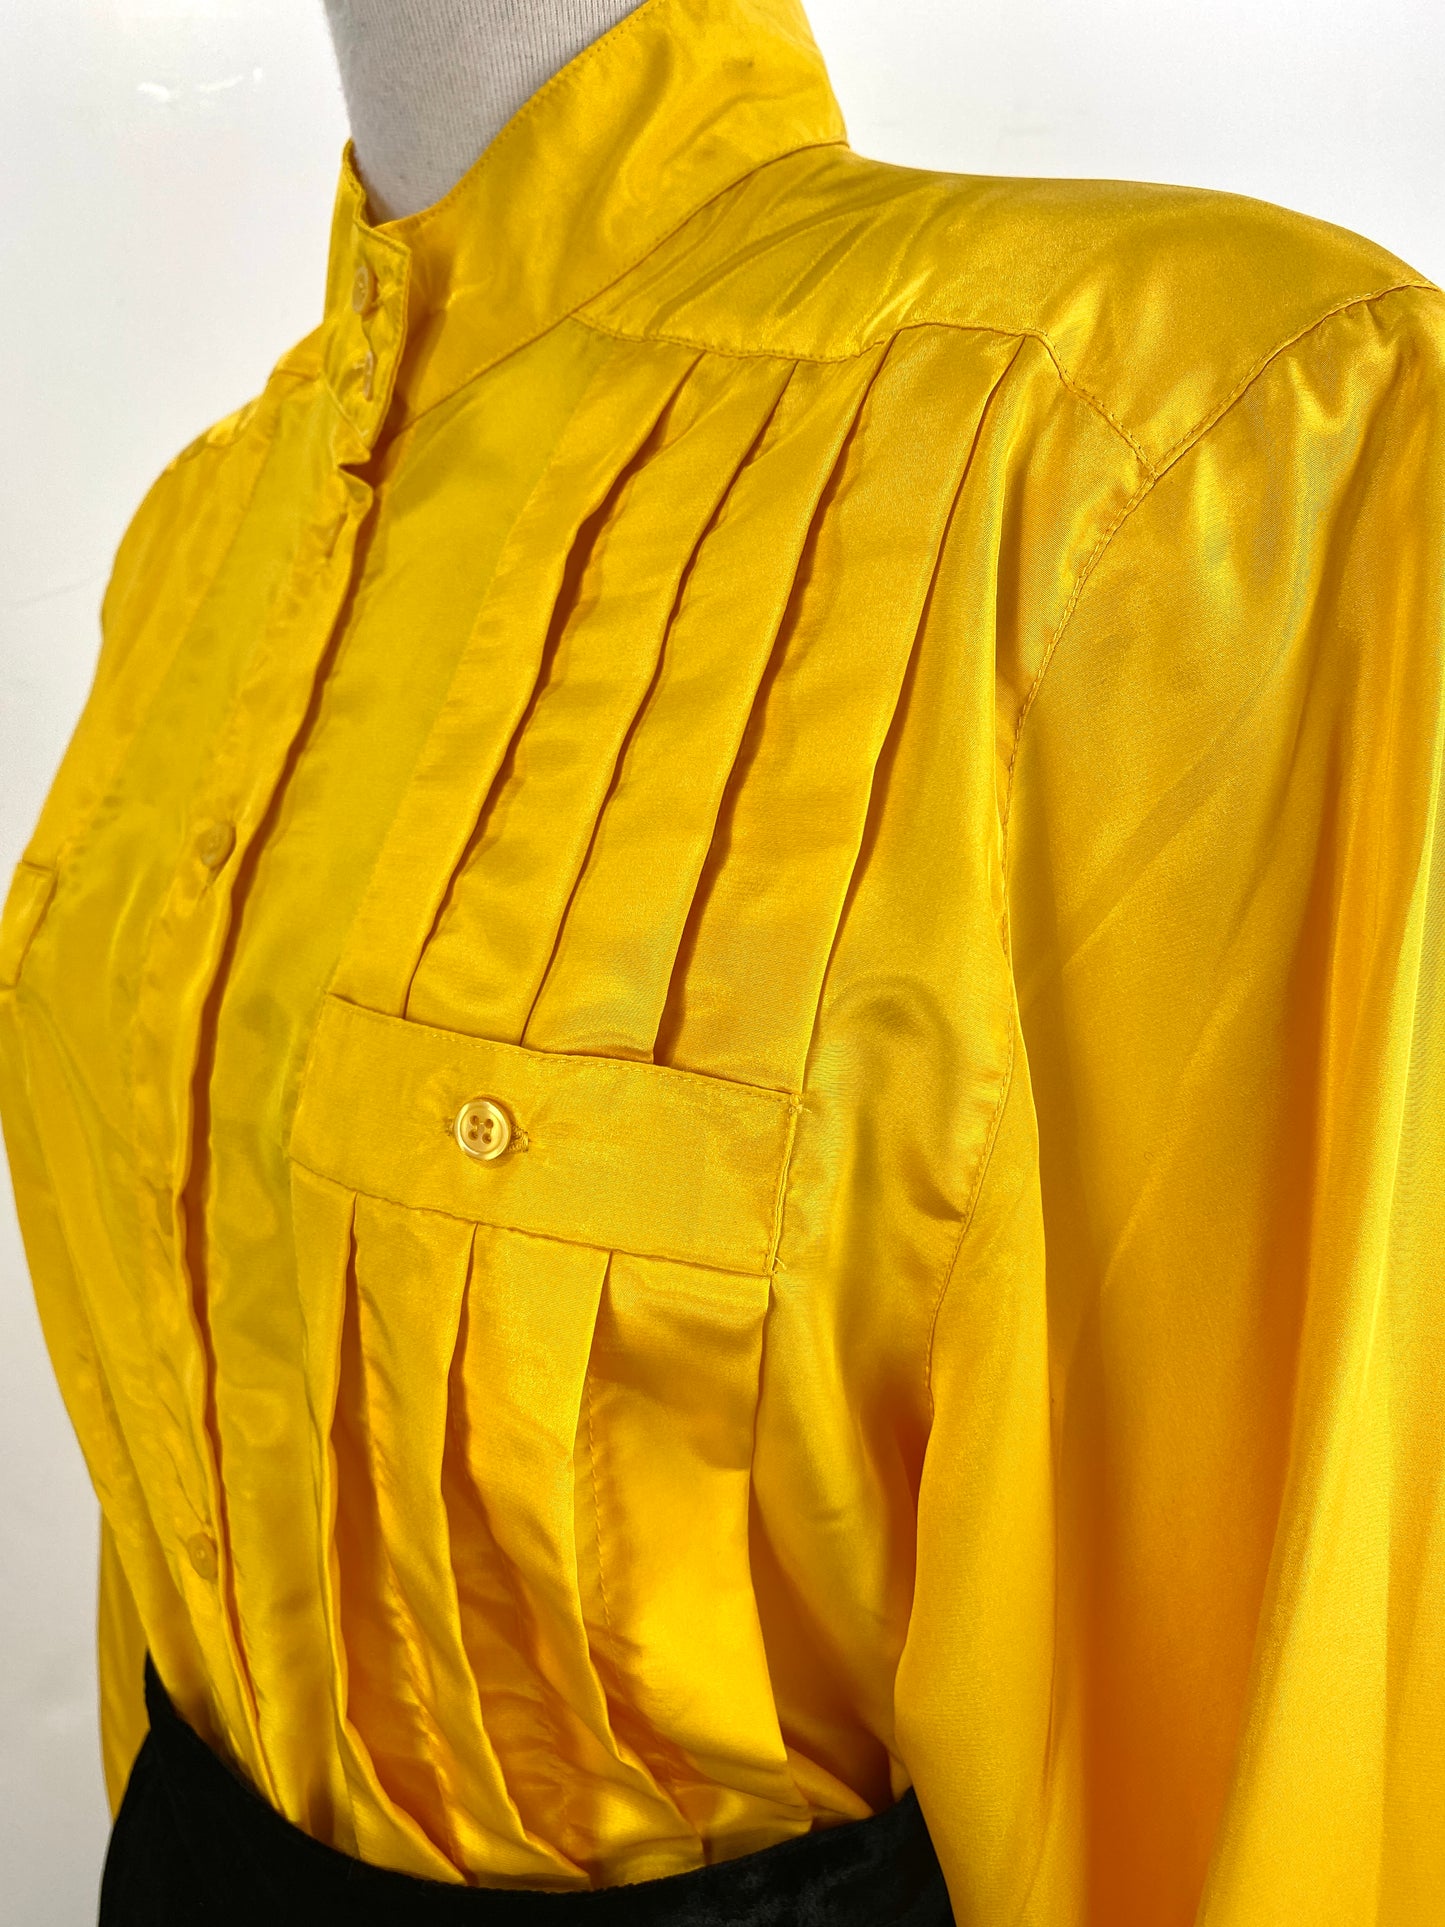 Vintage 1980s Deadstock Bright Yellow Pleated Blouse, Joan Harper, NOS